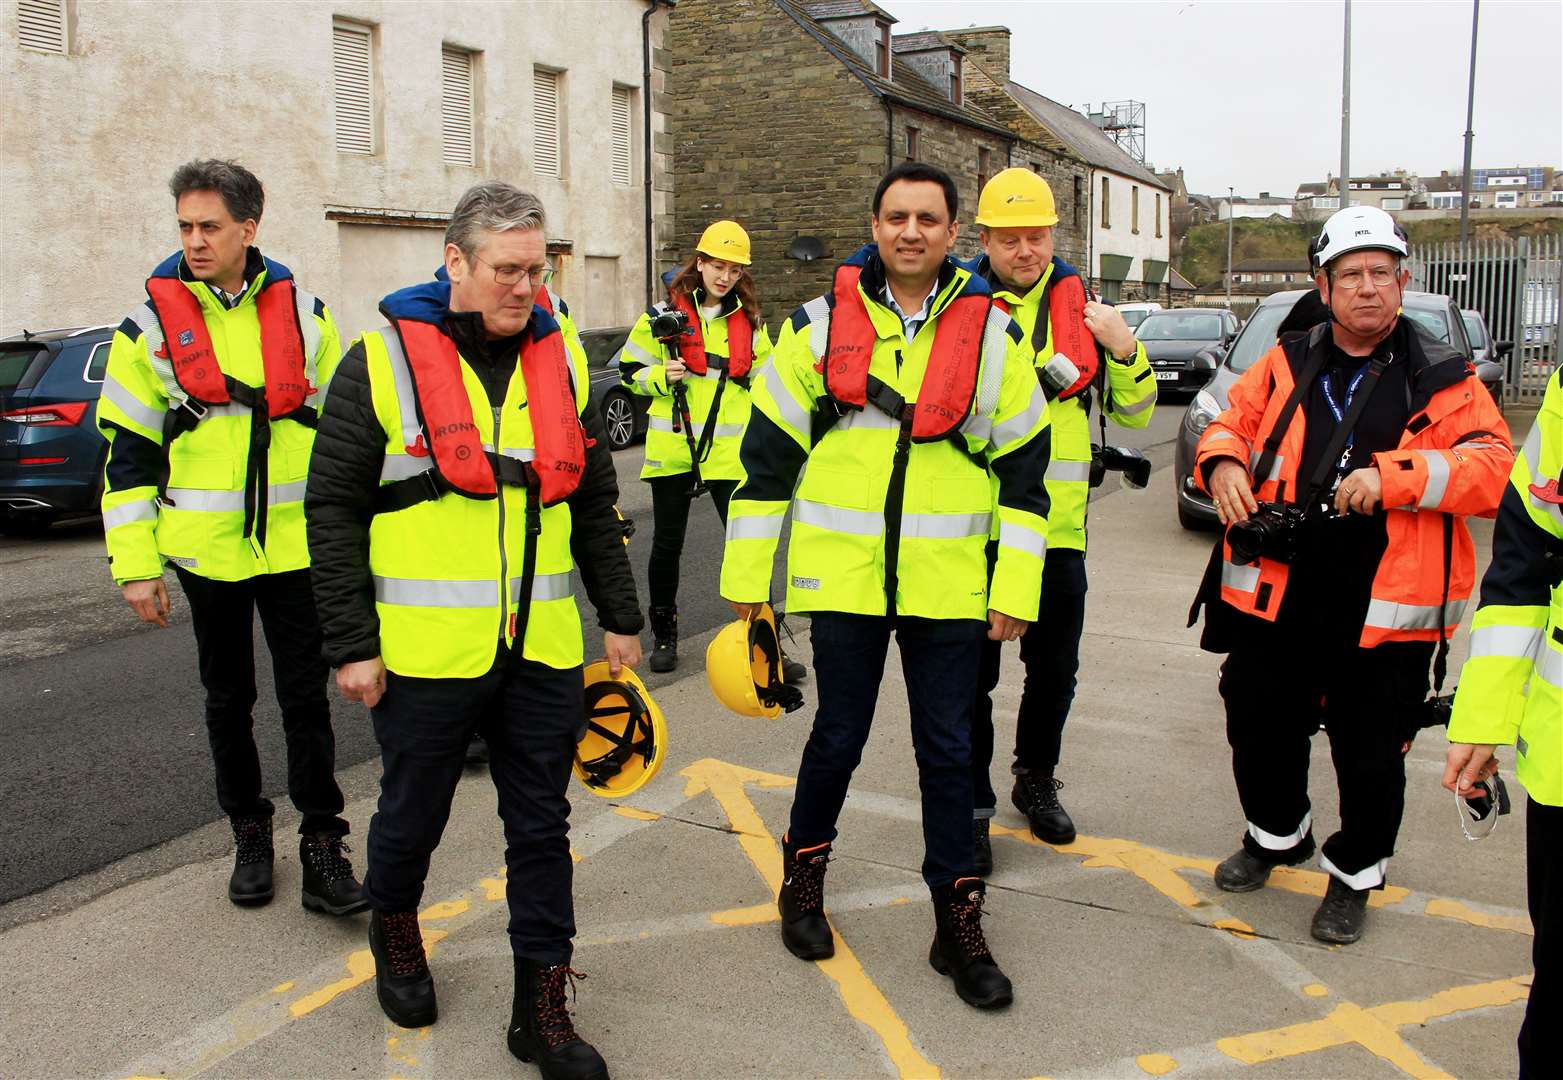 Ed Miliband (left) with Sir Keir Starmer, Anas Sarwar and others on their way to a crew transfer vessel that took them from Wick harbour to the Beatrice offshore wind farm. Picture: Alan Hendry